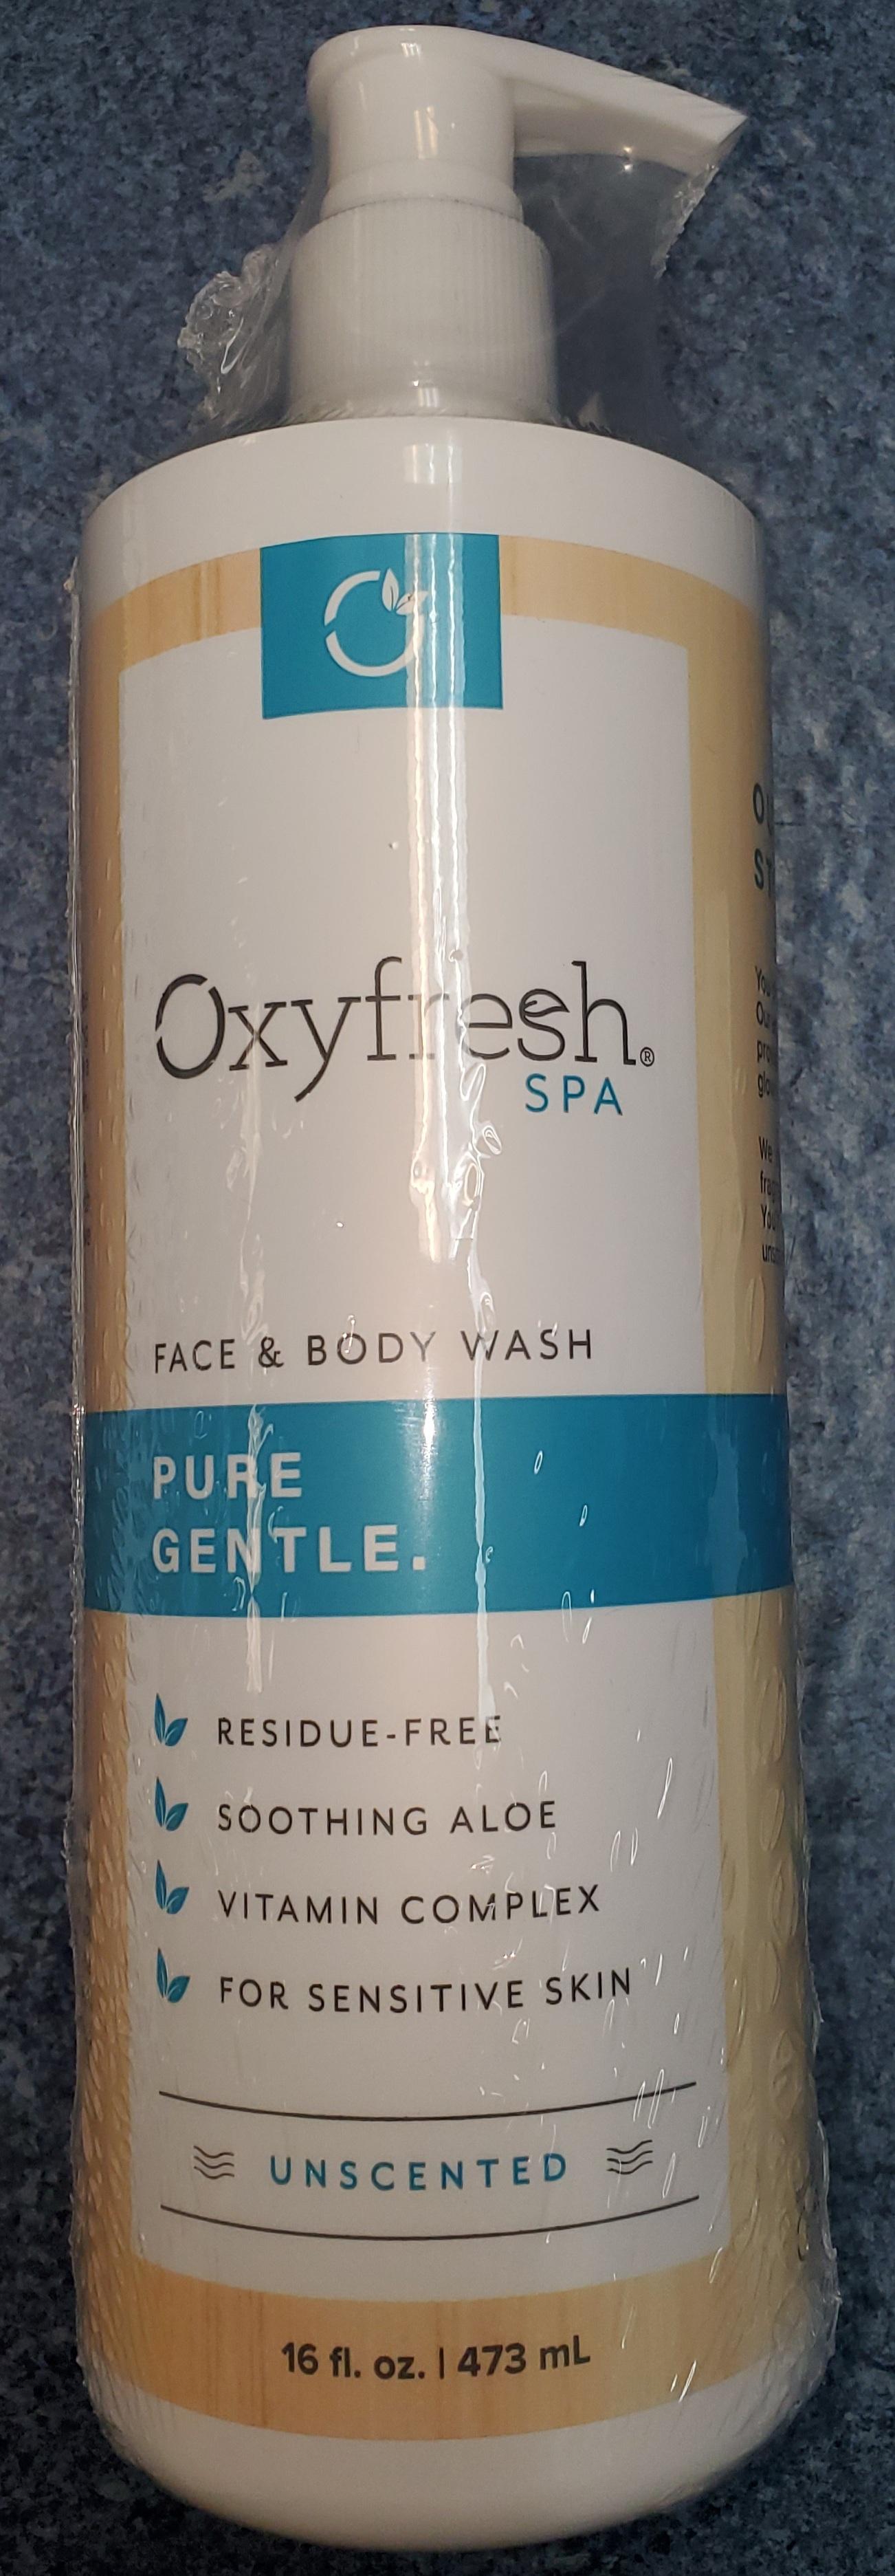 Face & Body Wash: 16oz (replaces Cleansing Gele') : 16oz.